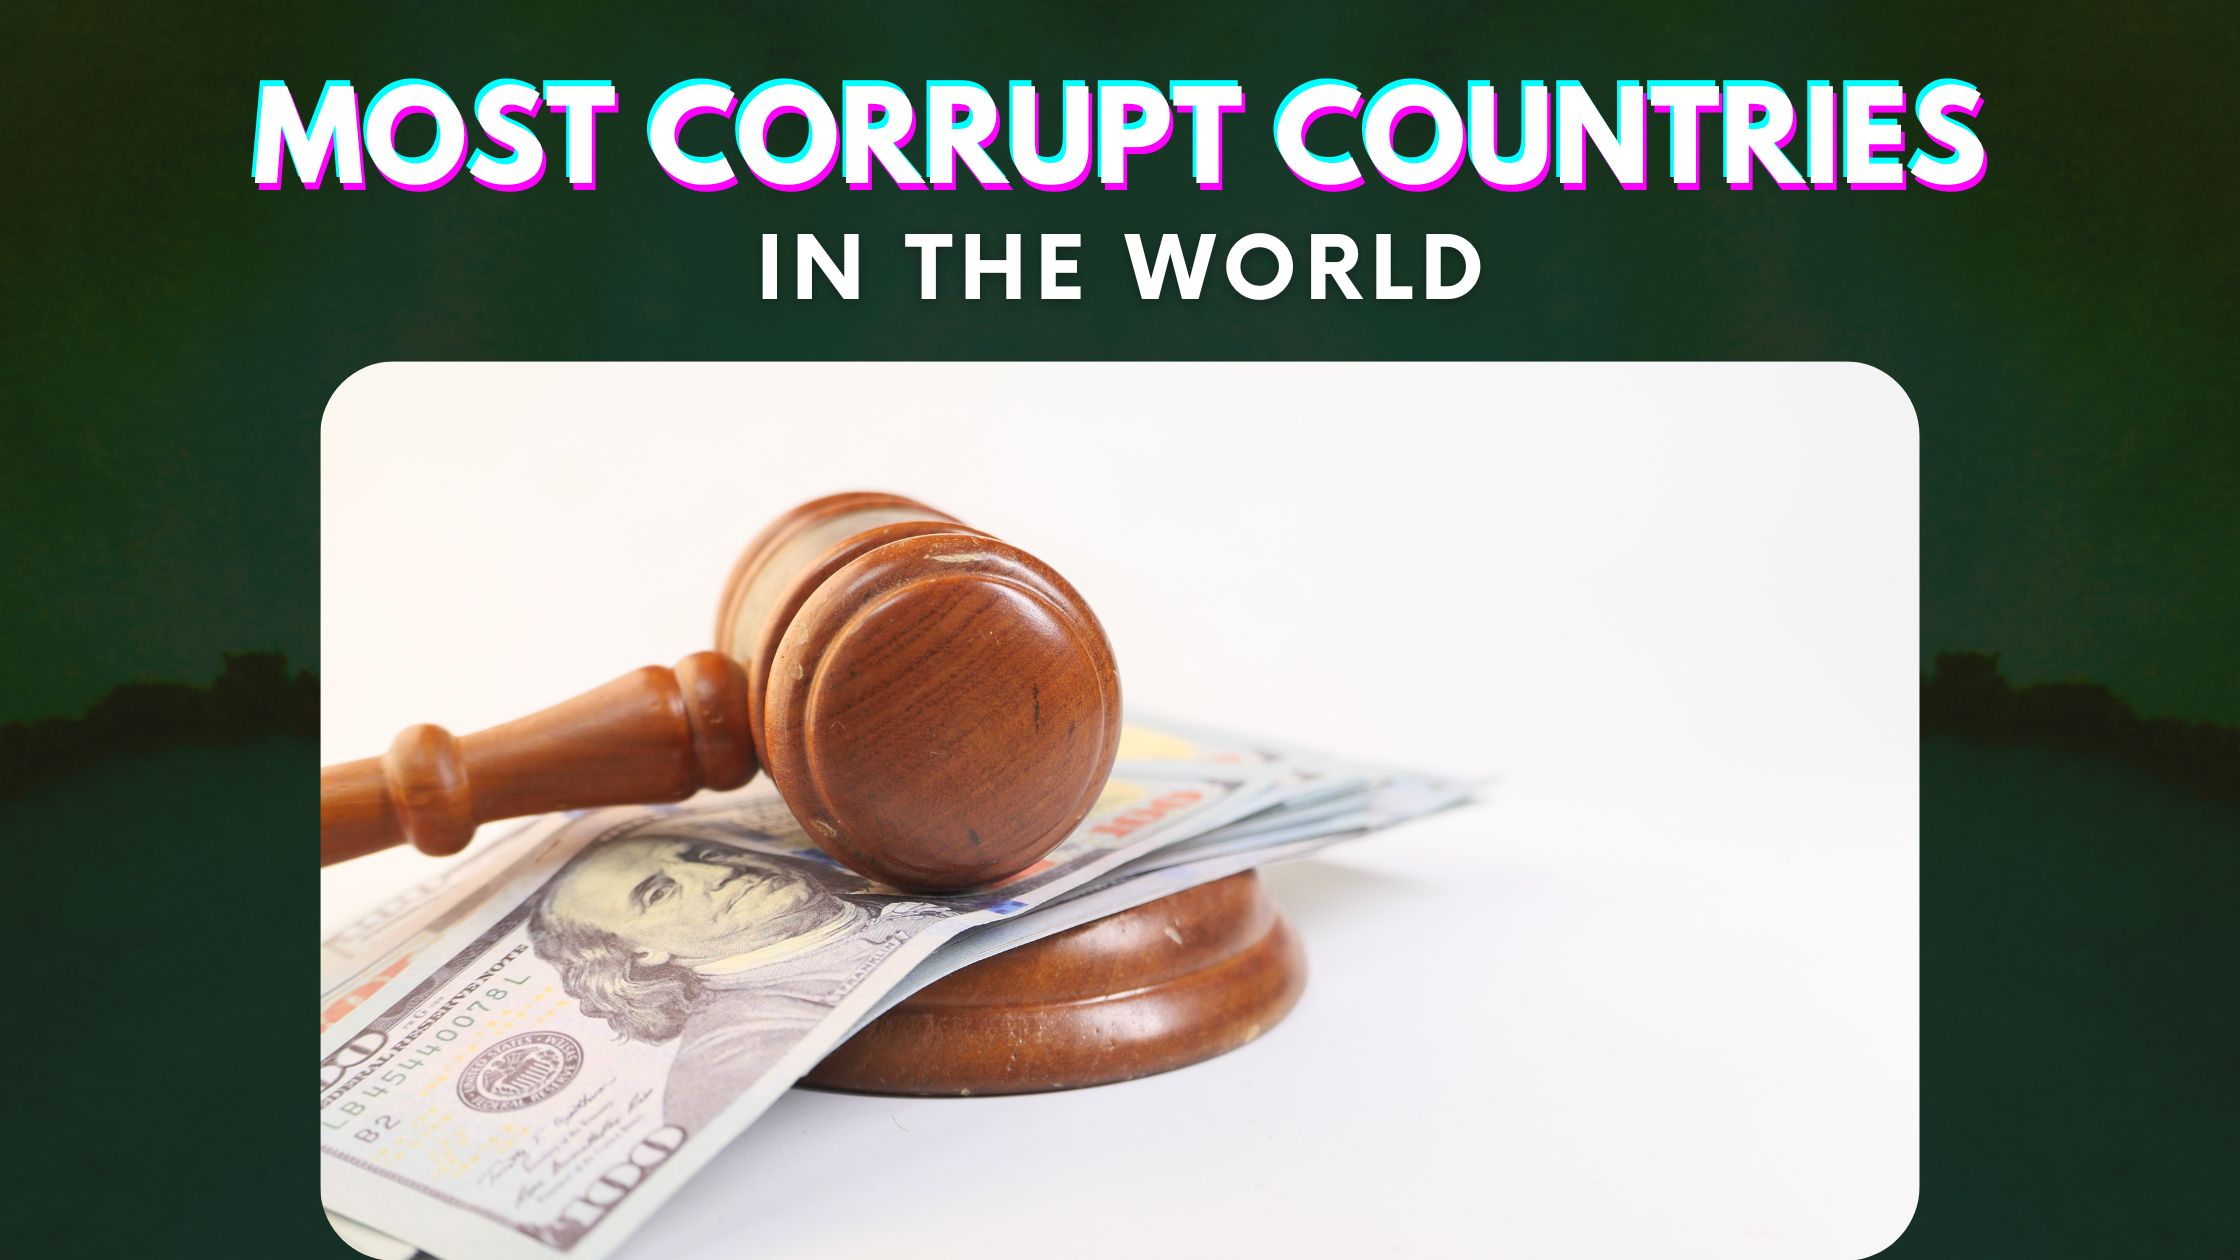 Top 10 Most Corrupt Countries in the World (2022)